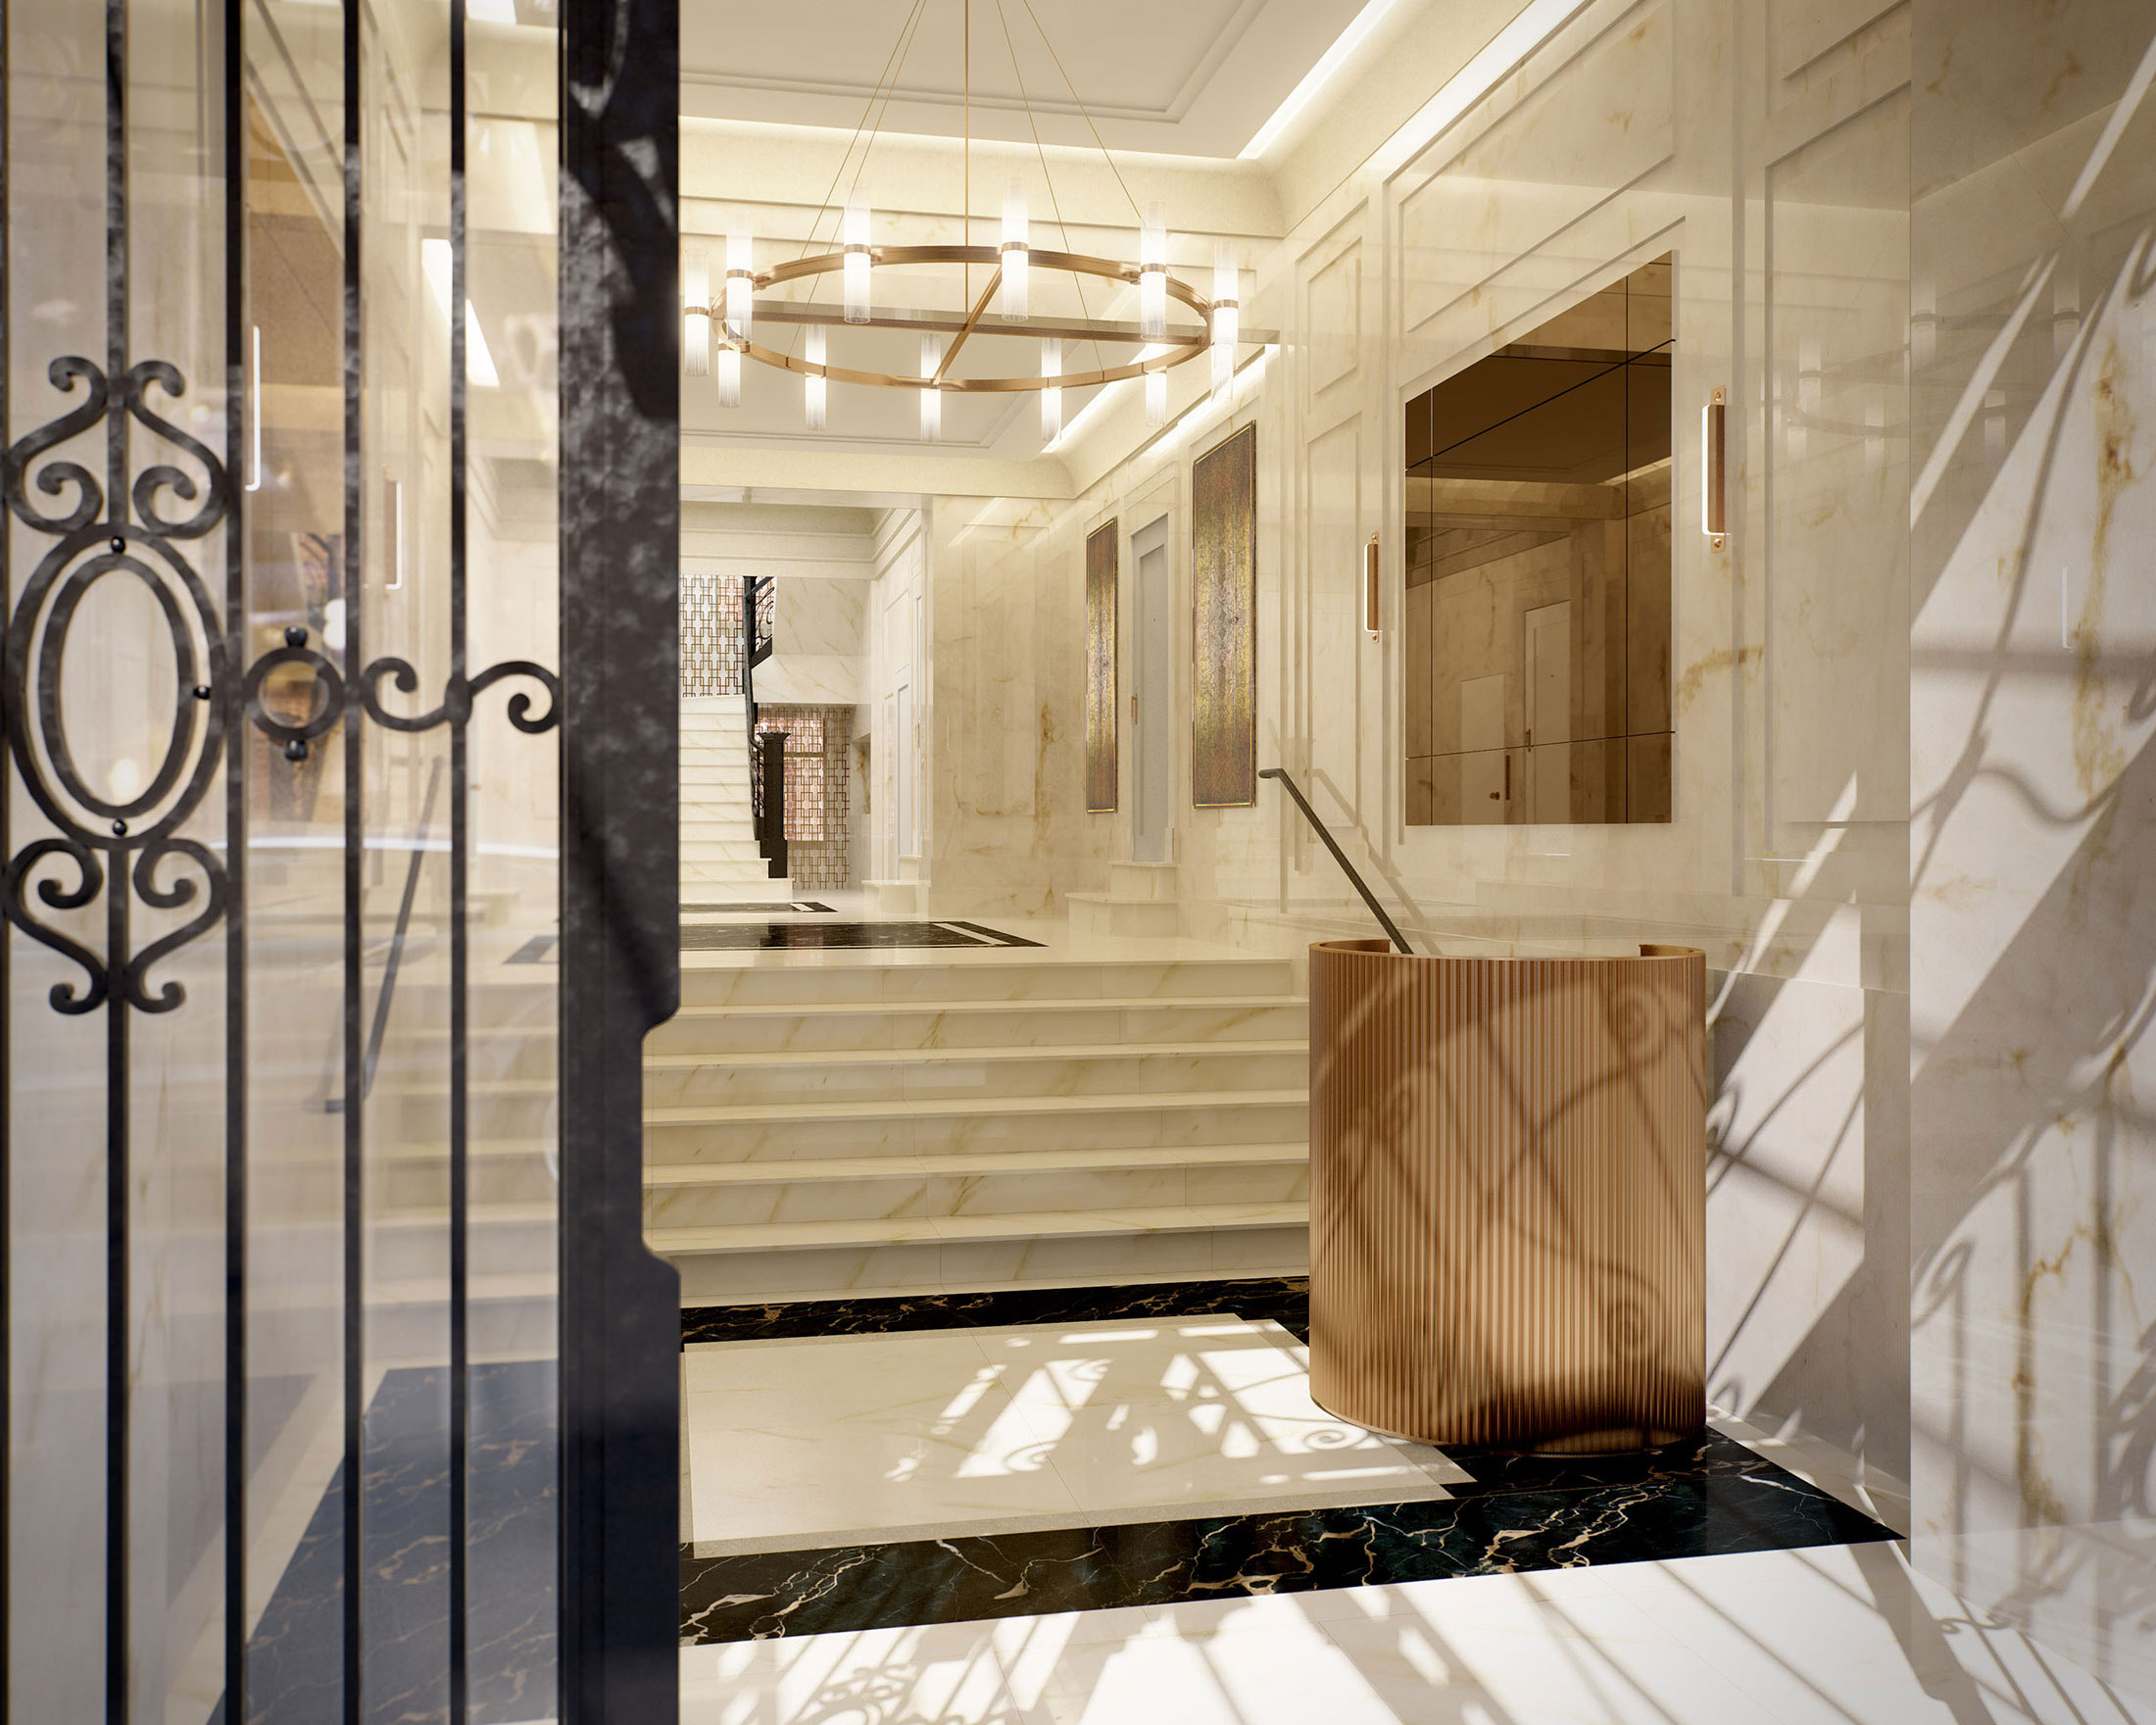 Architectural Rendering of the entrance of the 498 West End Avenue project located on the Upper West Side, New York City